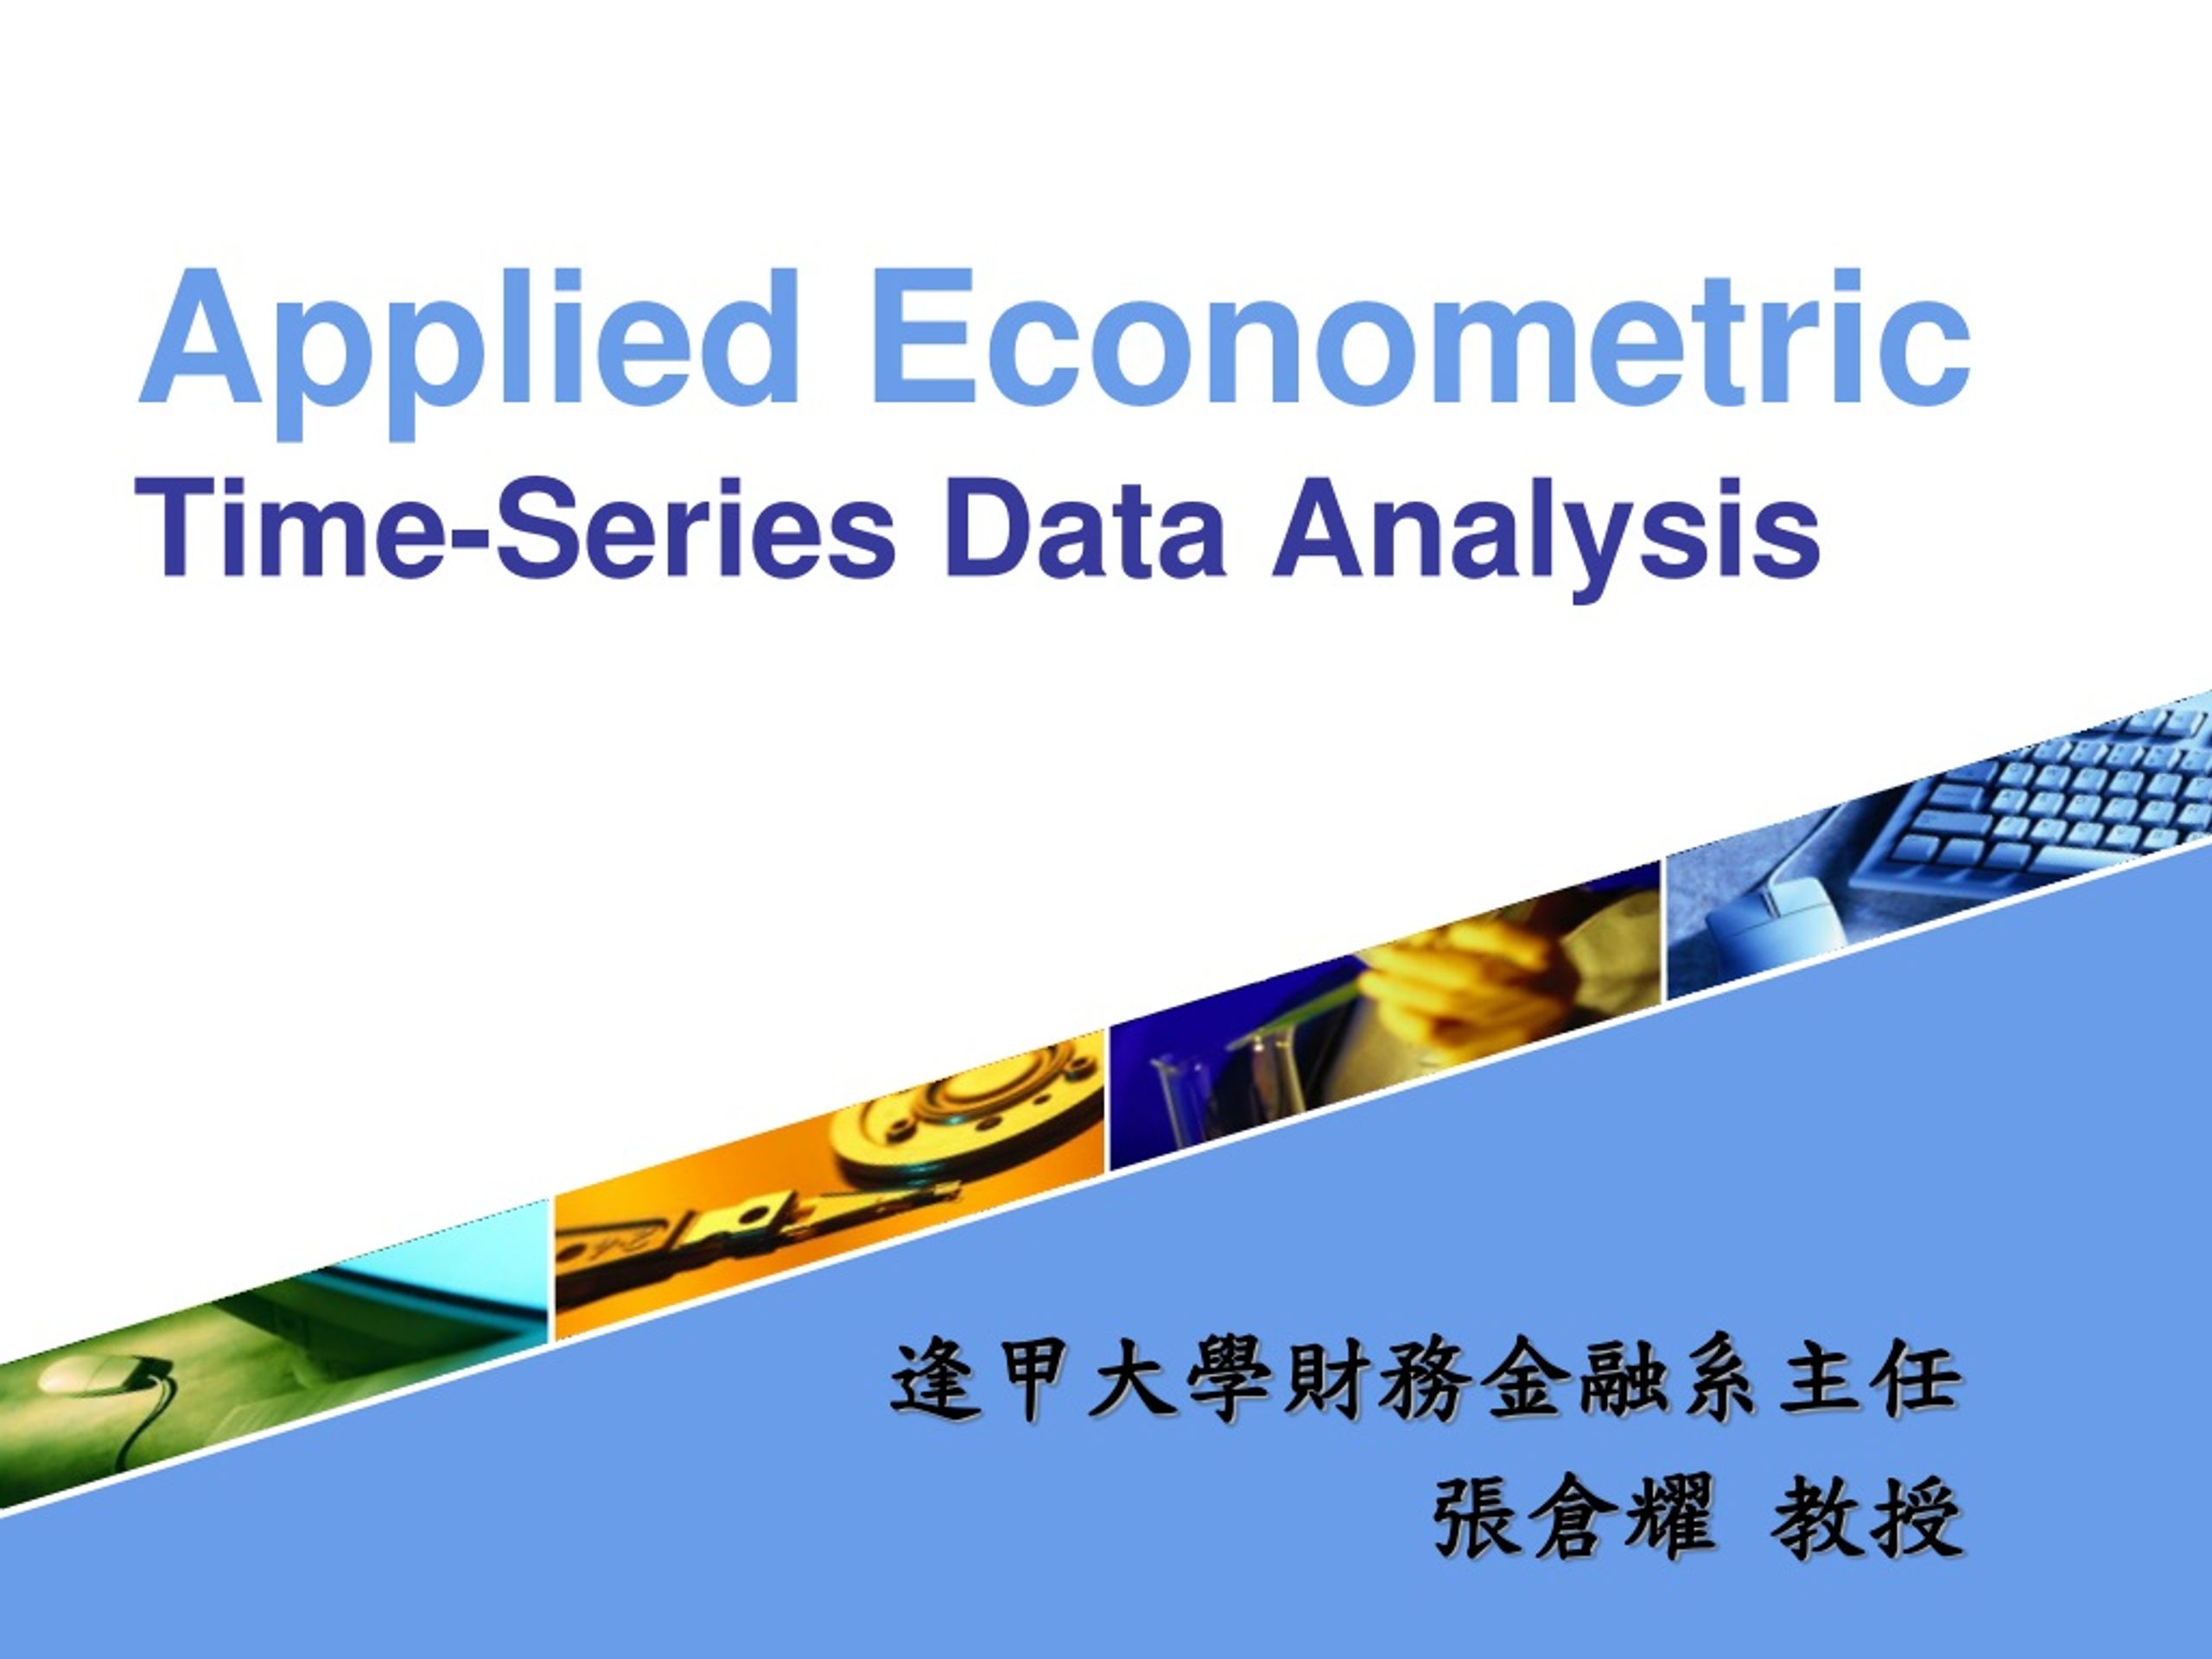 PPT - Applied Econometric Time-Series Data Analysis PowerPoint